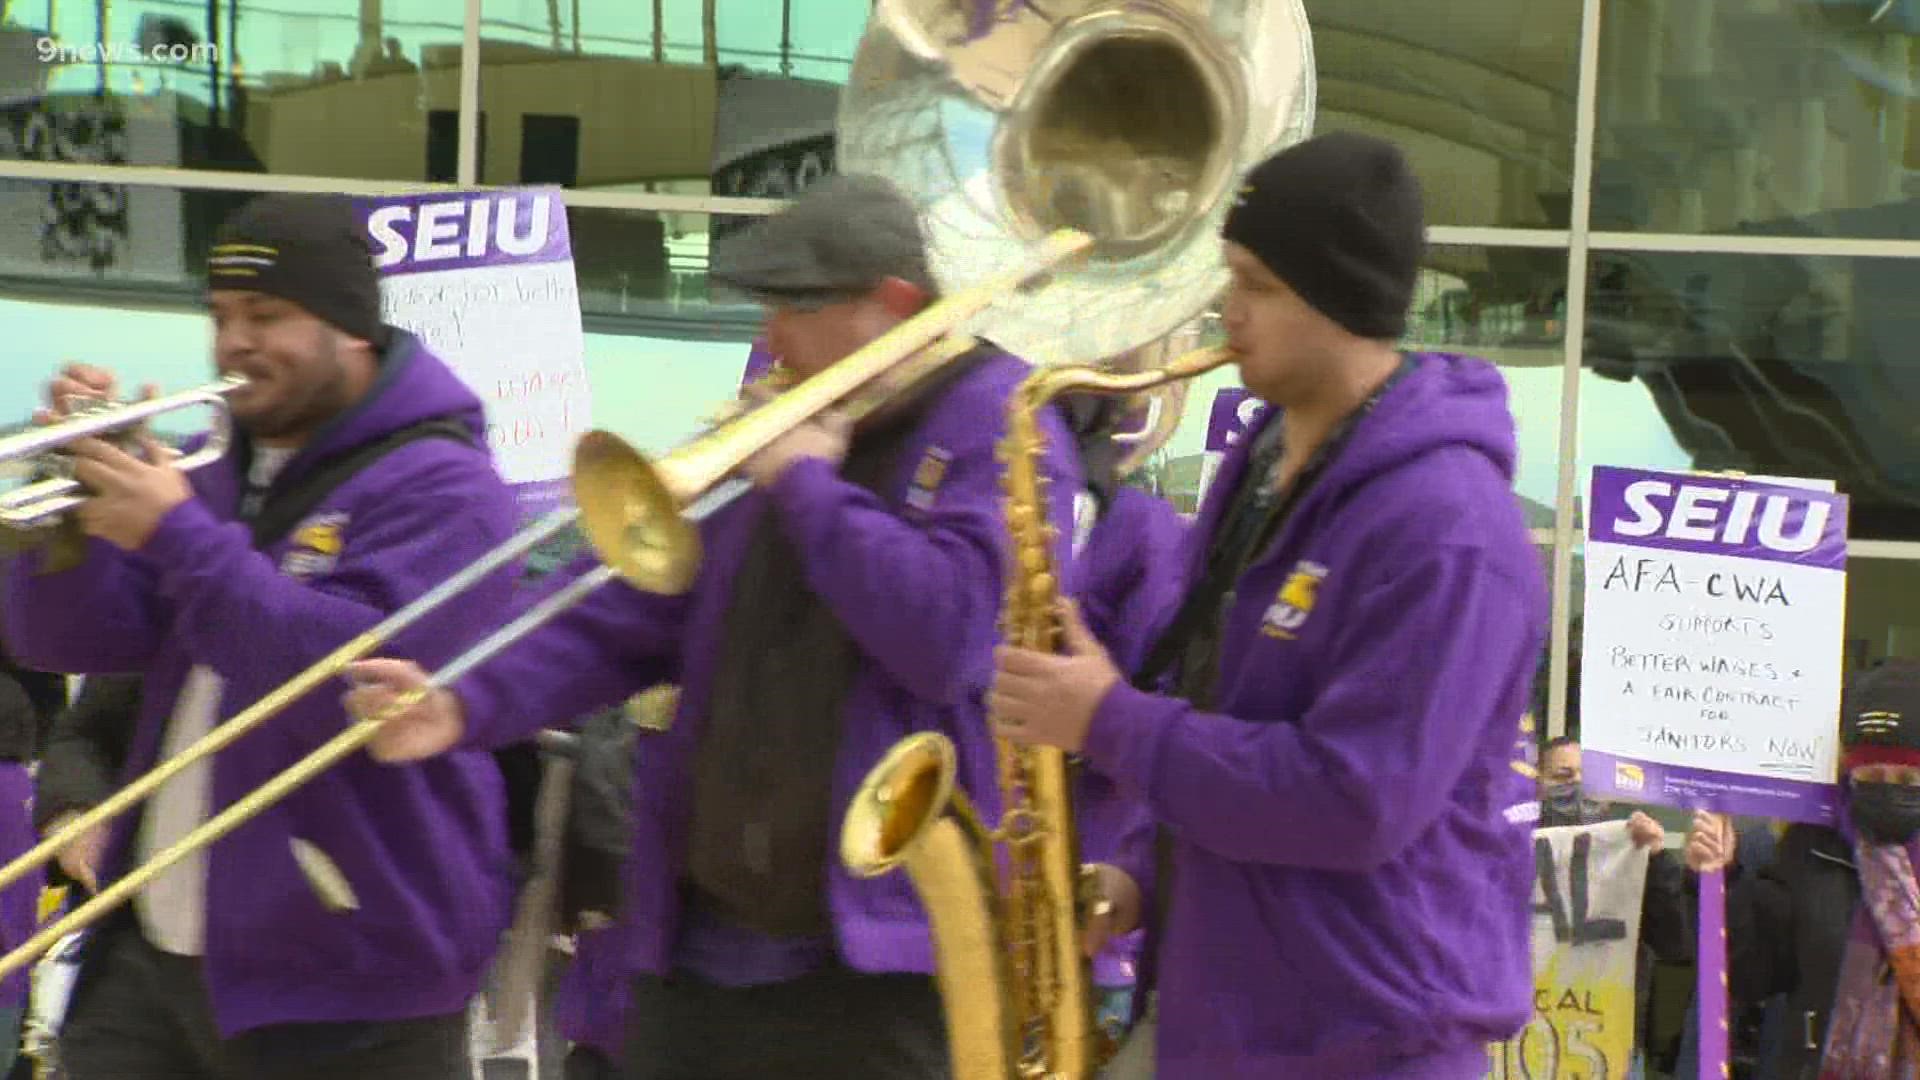 Janitors at DIA can expect to see a $4 an hour raise over their 3-year contracts, said SEIU.